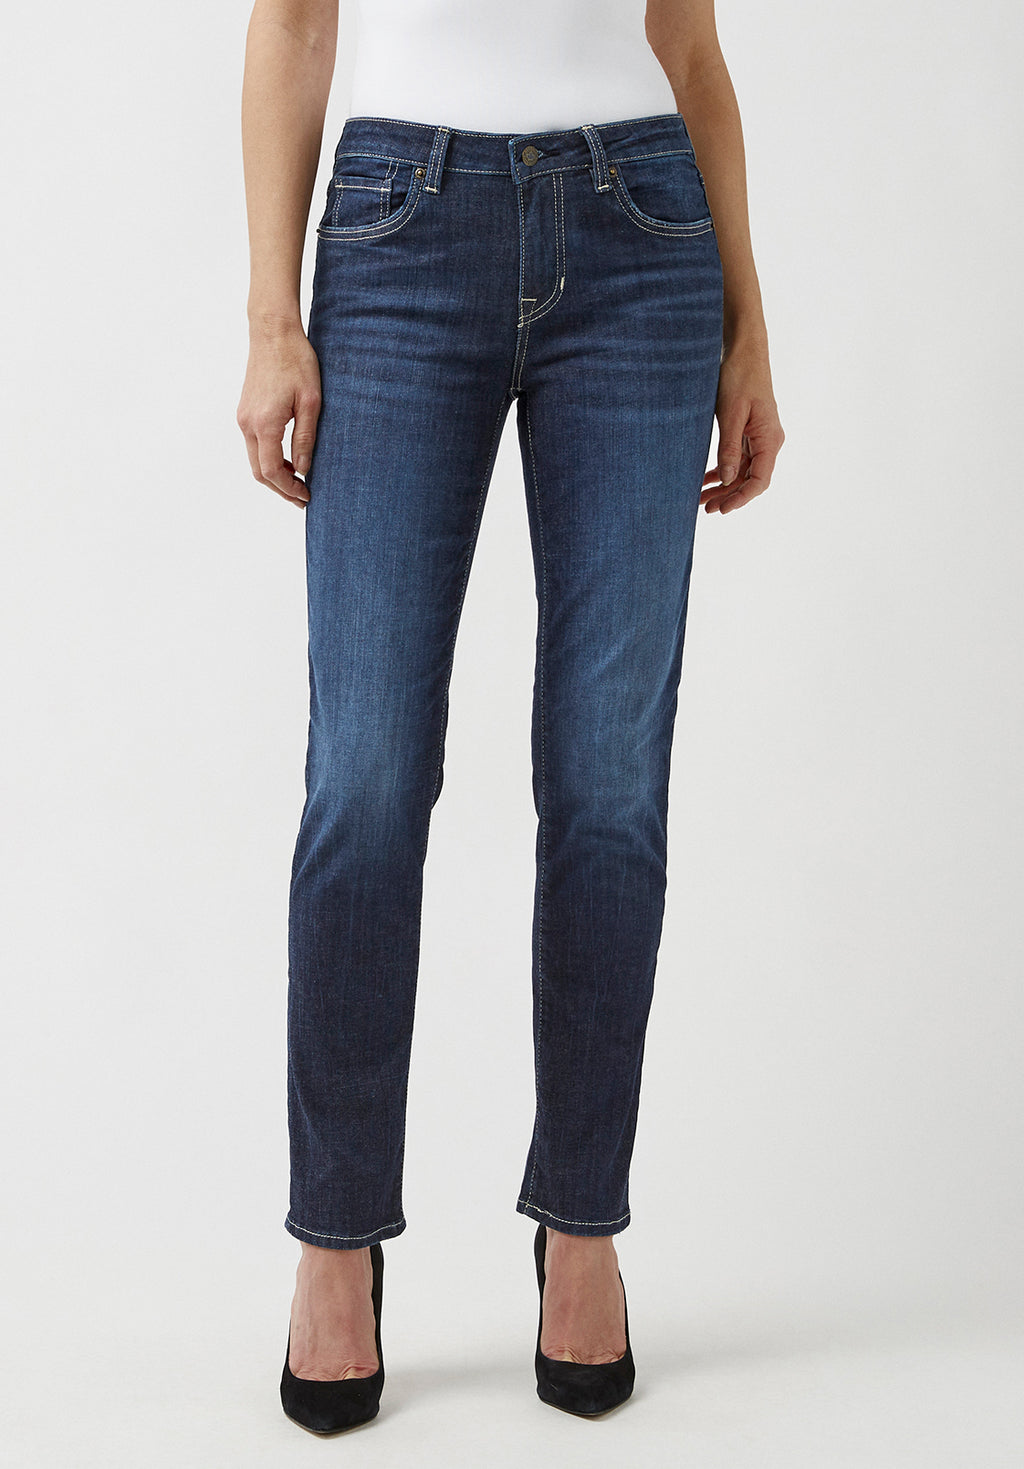 Mid Rise Slim Carrie Women's Jeans in Reckless Blue - BL15674 – Buffalo  Jeans CA